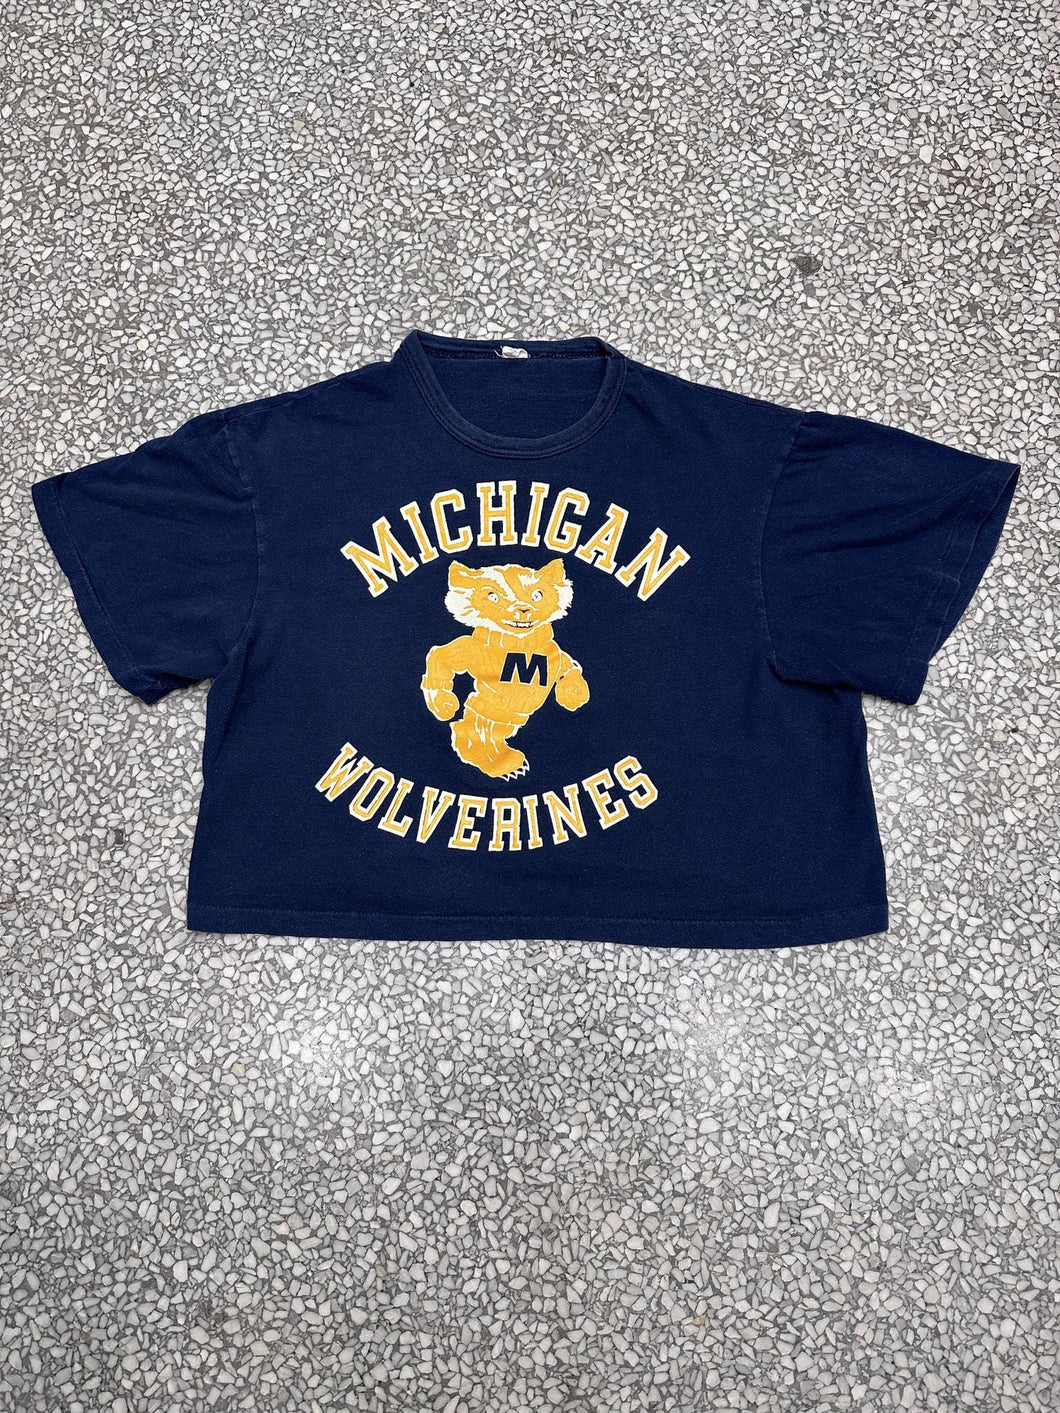 Michigan Wolverines Vintage 70s Cropped Tee Faded Navy ABC Vintage 